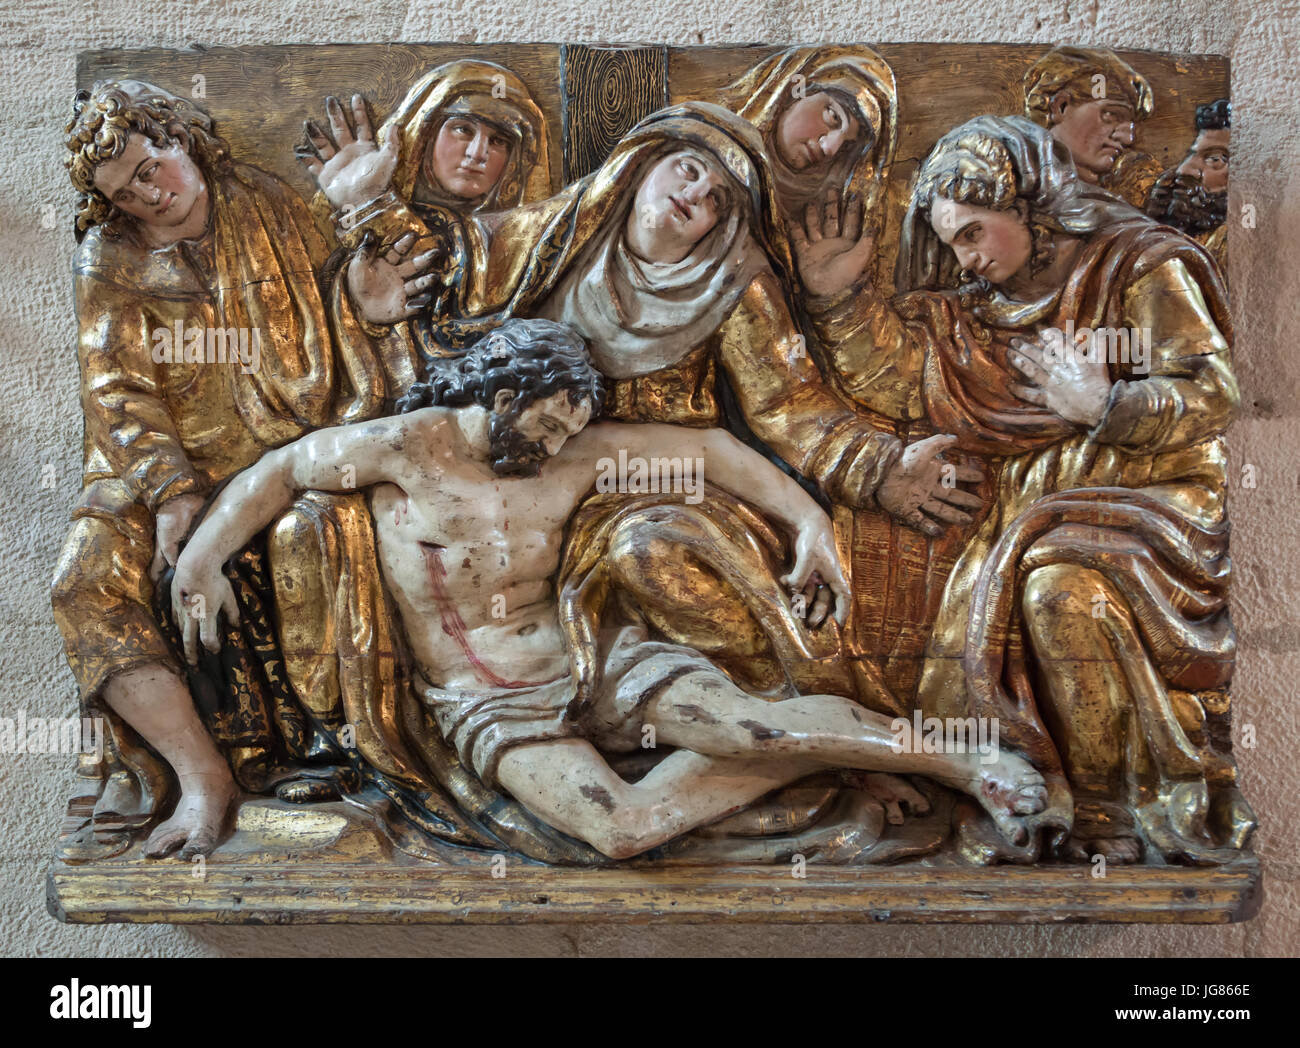 Lamentation of Christ. Polychrome wooden panel from the 16th century attributed to Spanish sculptor Francisco de la Maza on display in the Diocesan and Cathedral Museum (Museo Diocesano y Catedralicio de Valladolid) in Valladolid in Castile and León, Spain. Stock Photo